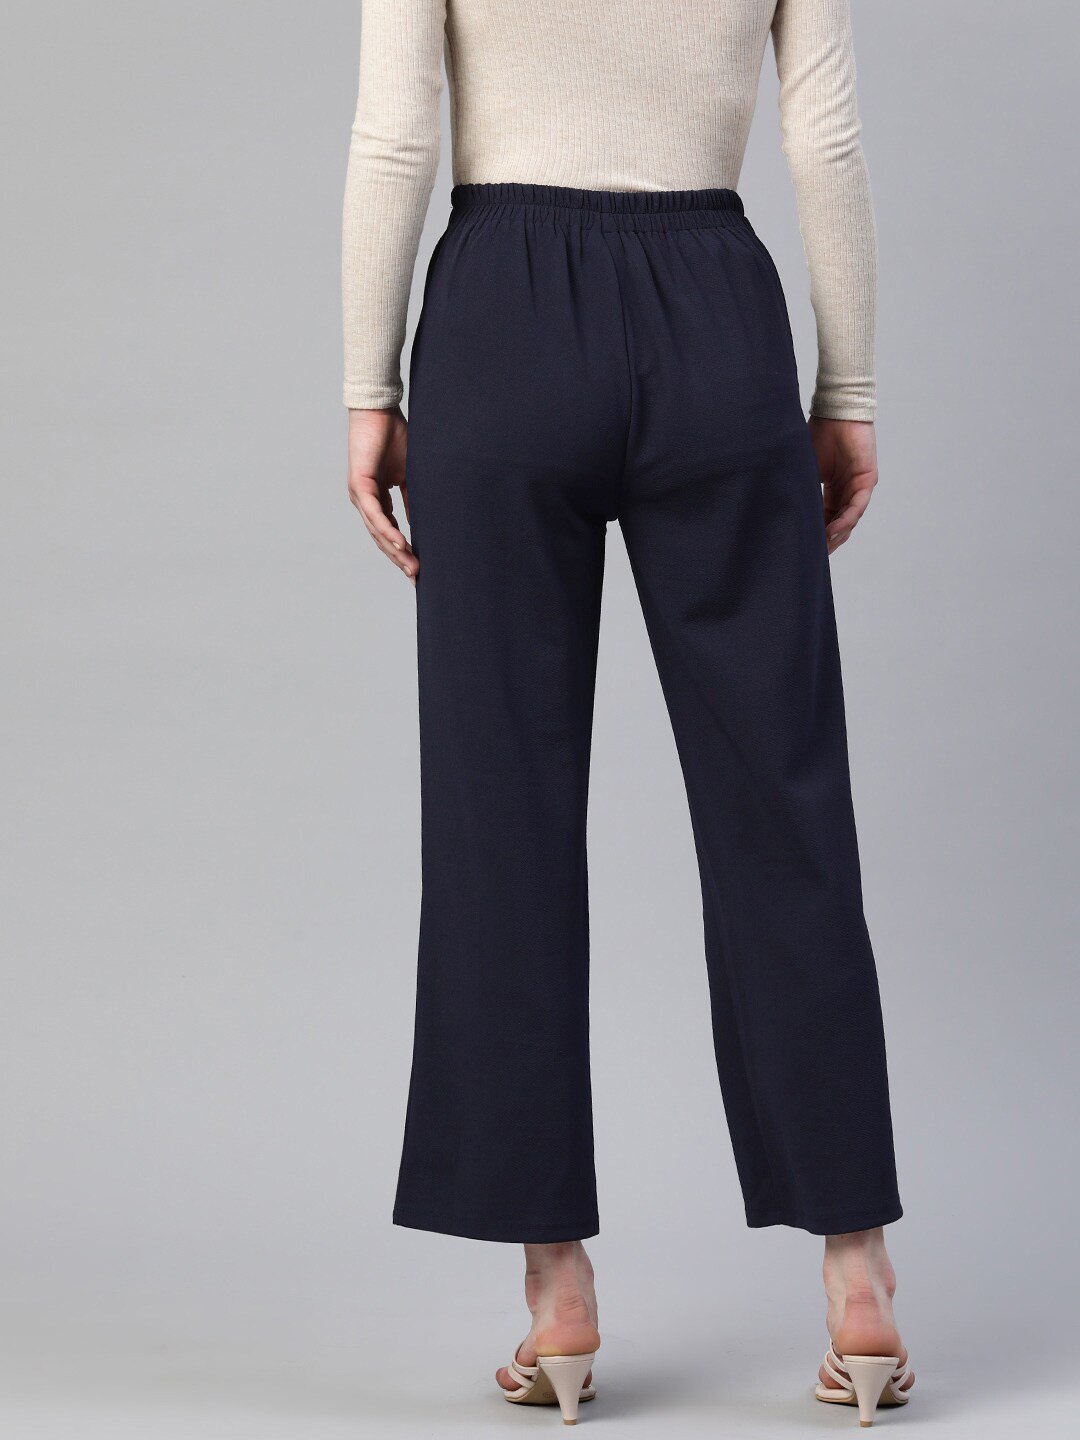 Buy Jaipur Trousers & Lowers online - Women - 133 products | FASHIOLA INDIA